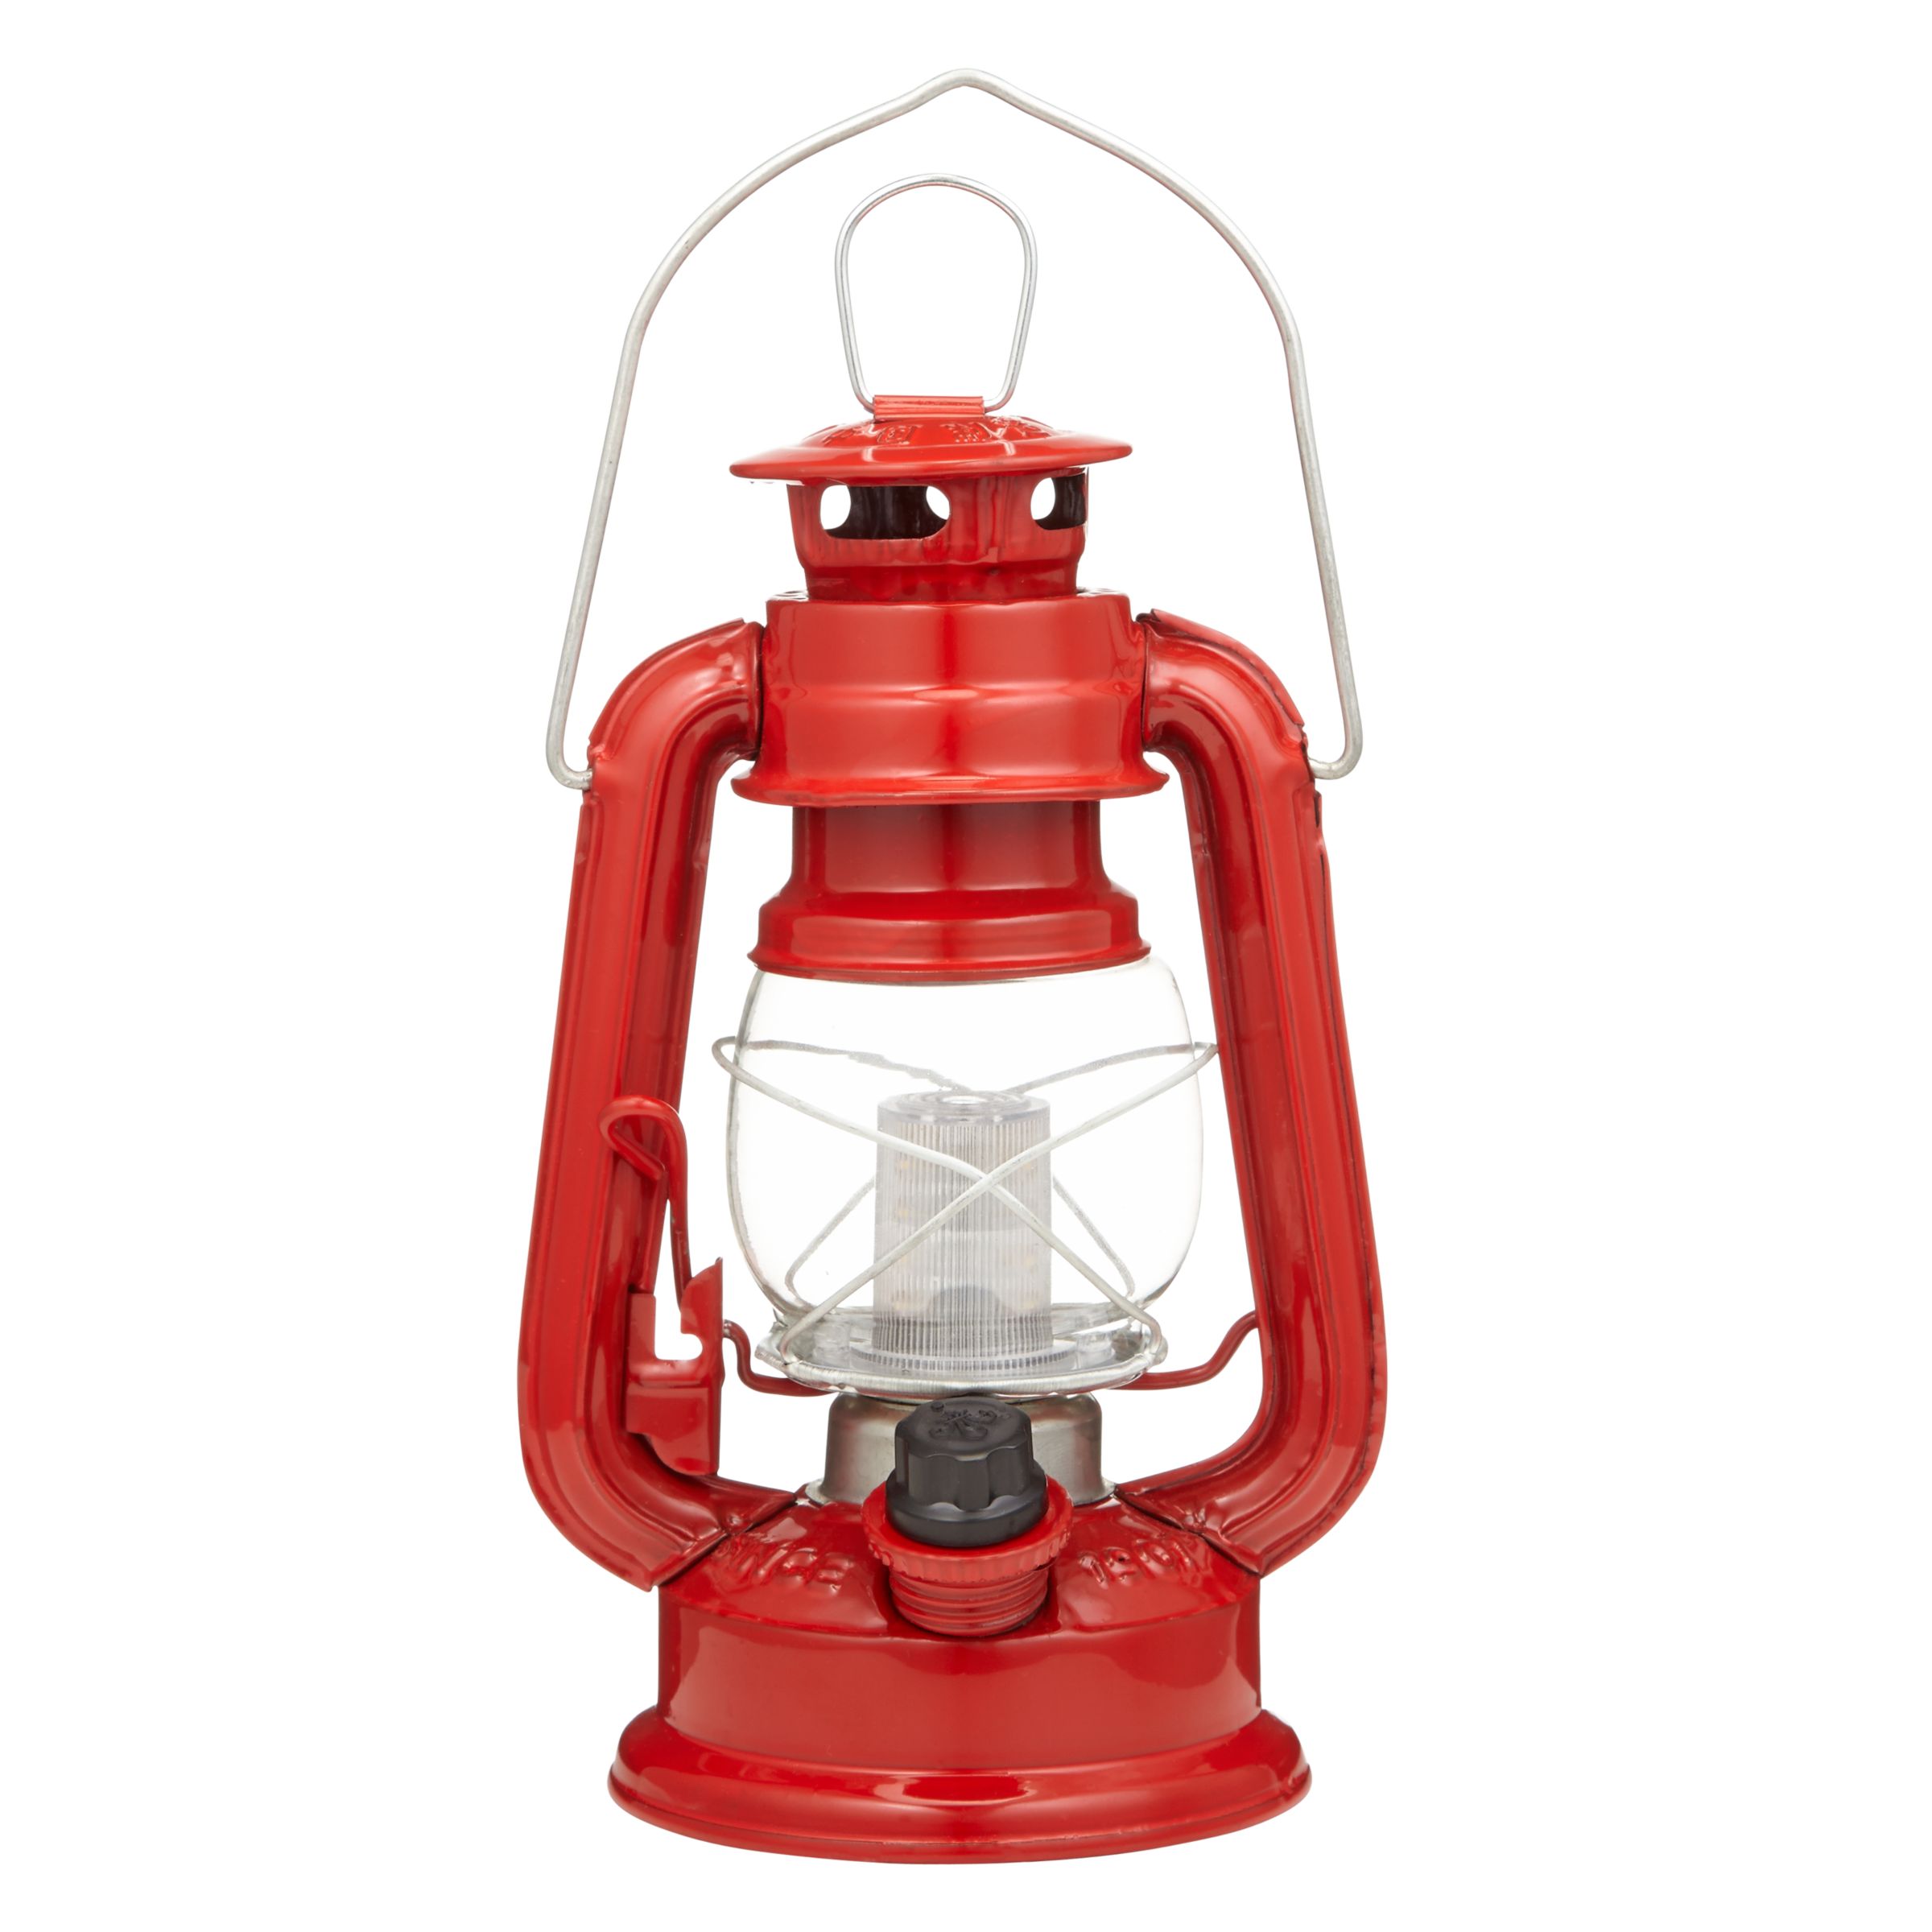 Scouting LED Lantern, Red, Small